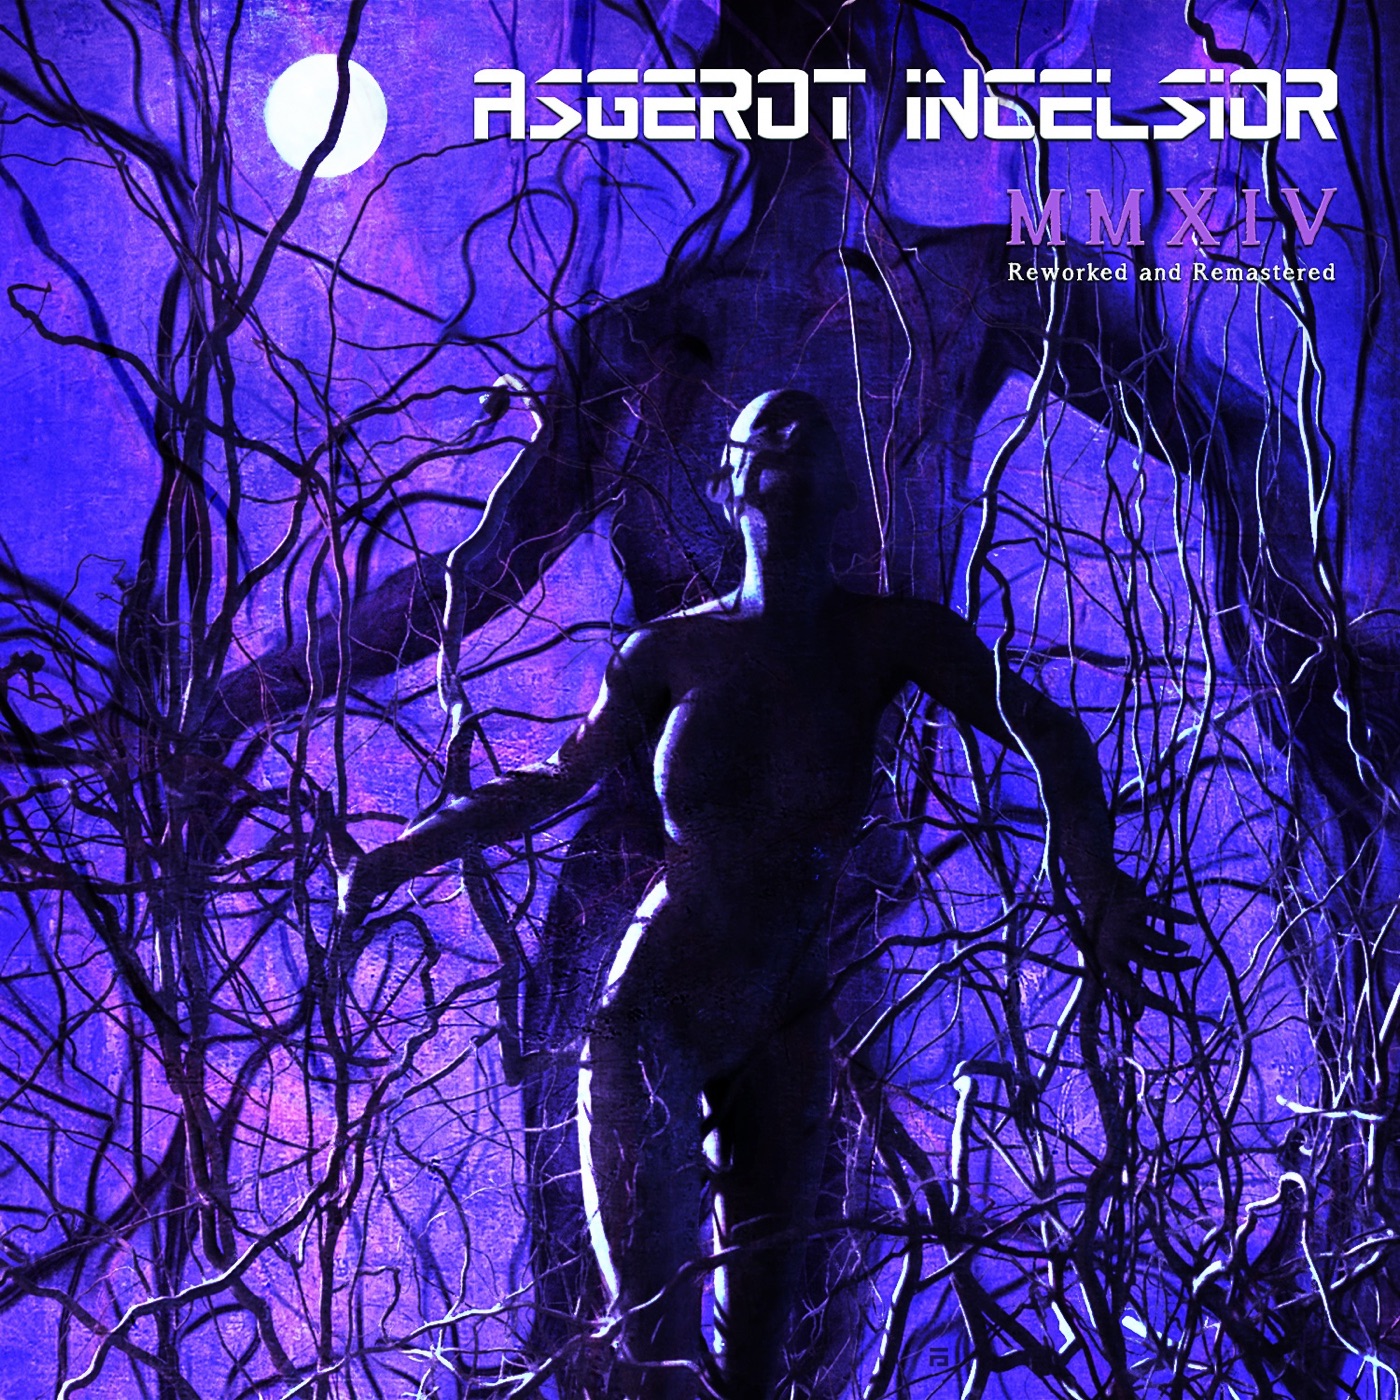 Asgerot Incelsior - Voodoo Moon (Half-Evil-Remix by STOPPENBERG)